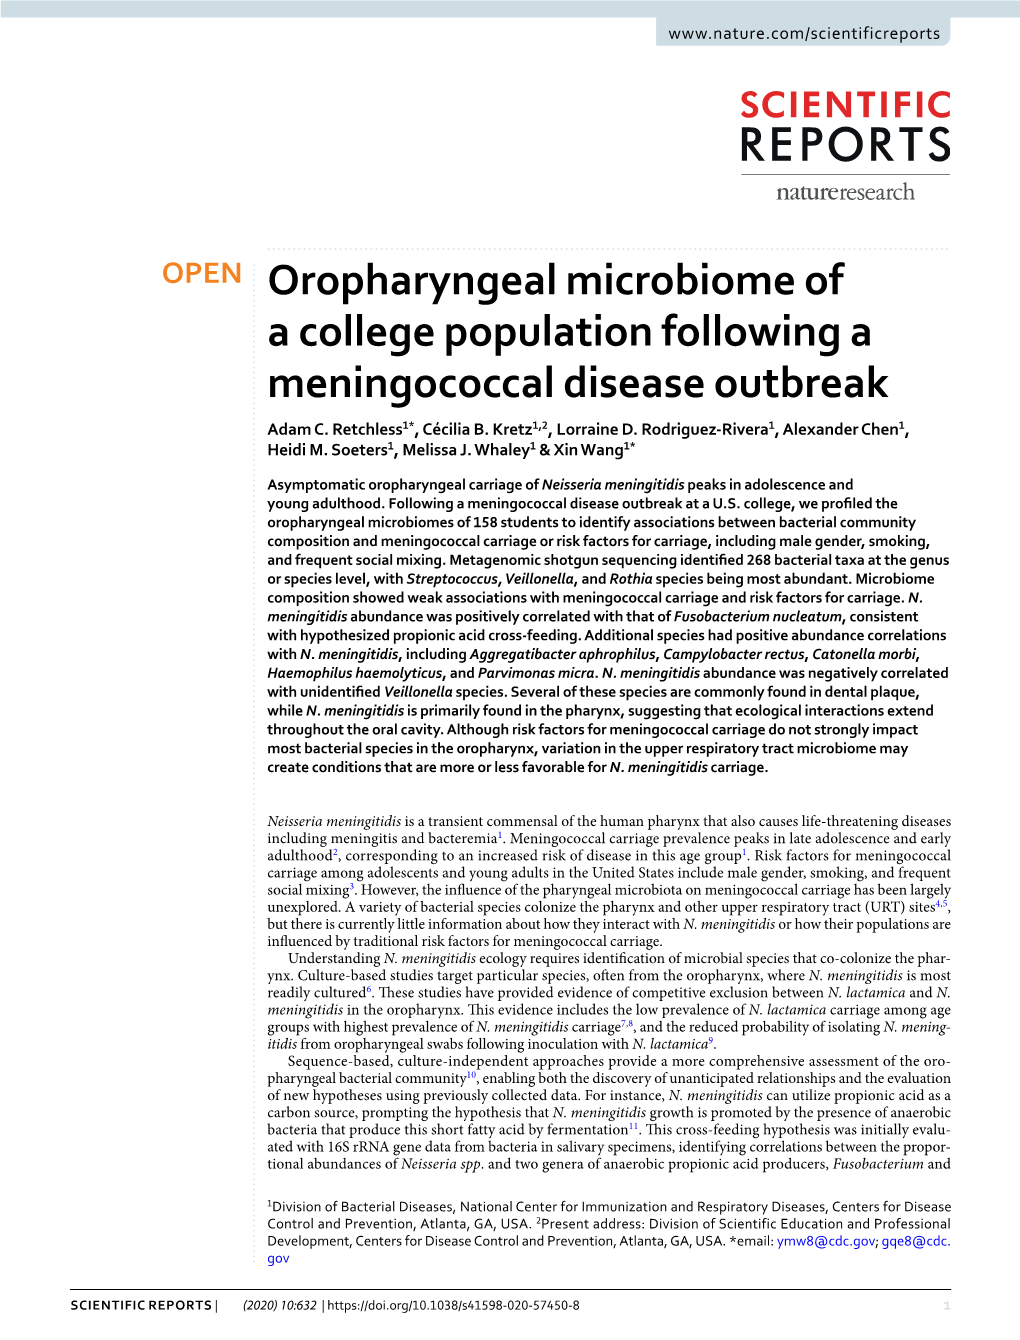 Oropharyngeal Microbiome of a College Population Following a Meningococcal Disease Outbreak Adam C